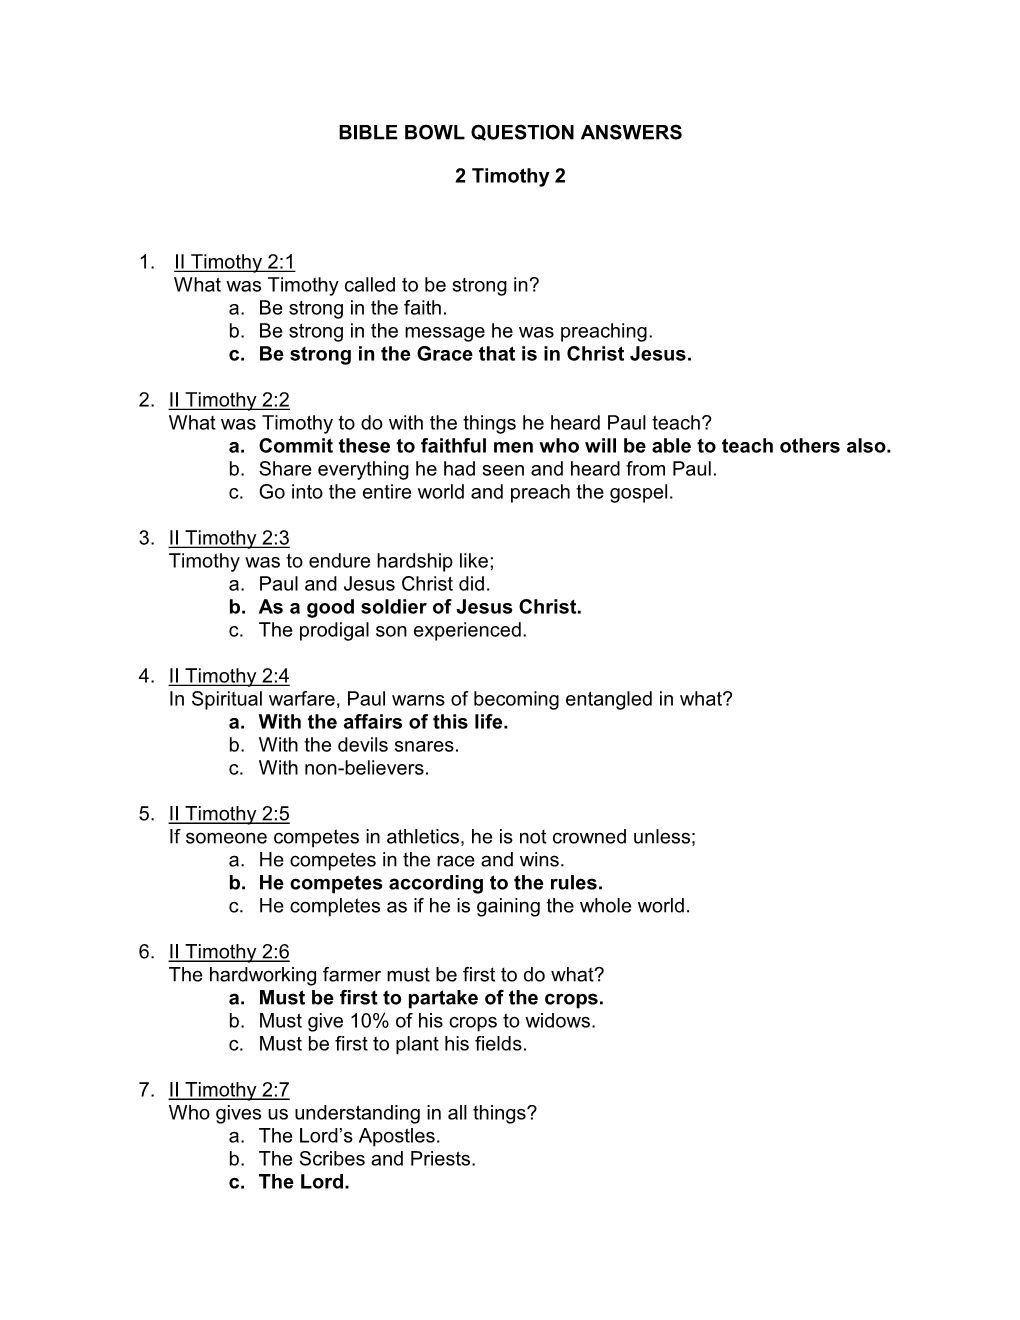 BIBLE BOWL QUESTION ANSWERS 2 Timothy 2 1. II